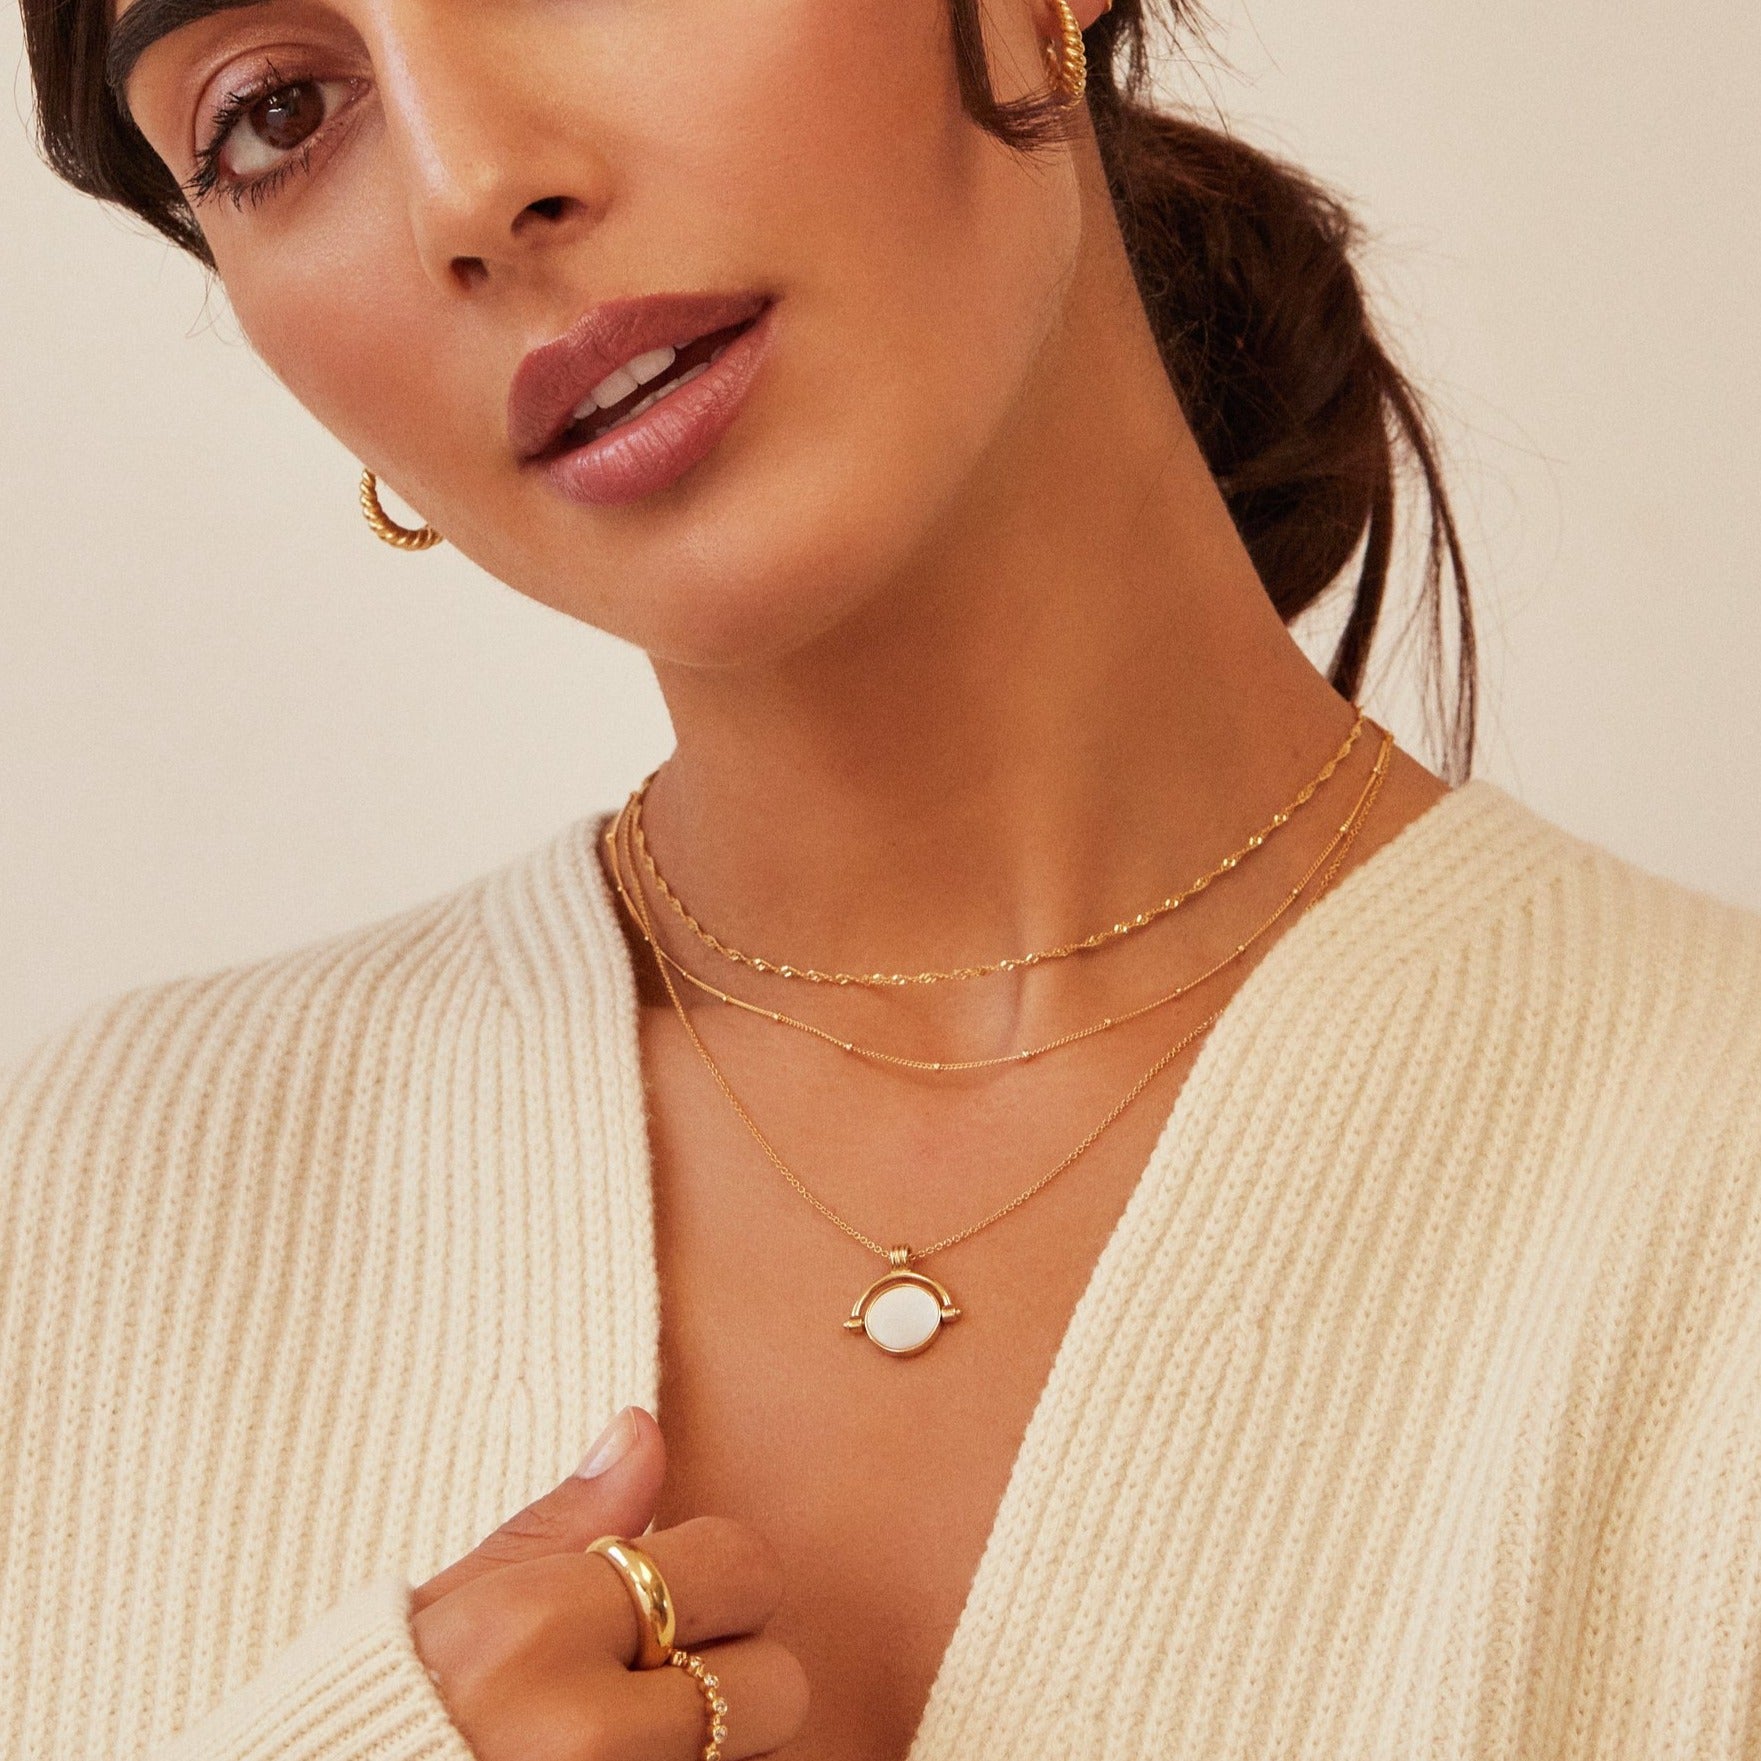 Gold satellite chain necklace layered with a gold mother of pearl spinning disc necklace and a gold twisted rope necklace on a woman wearing a cream knitted jumper holding it open with her hand 